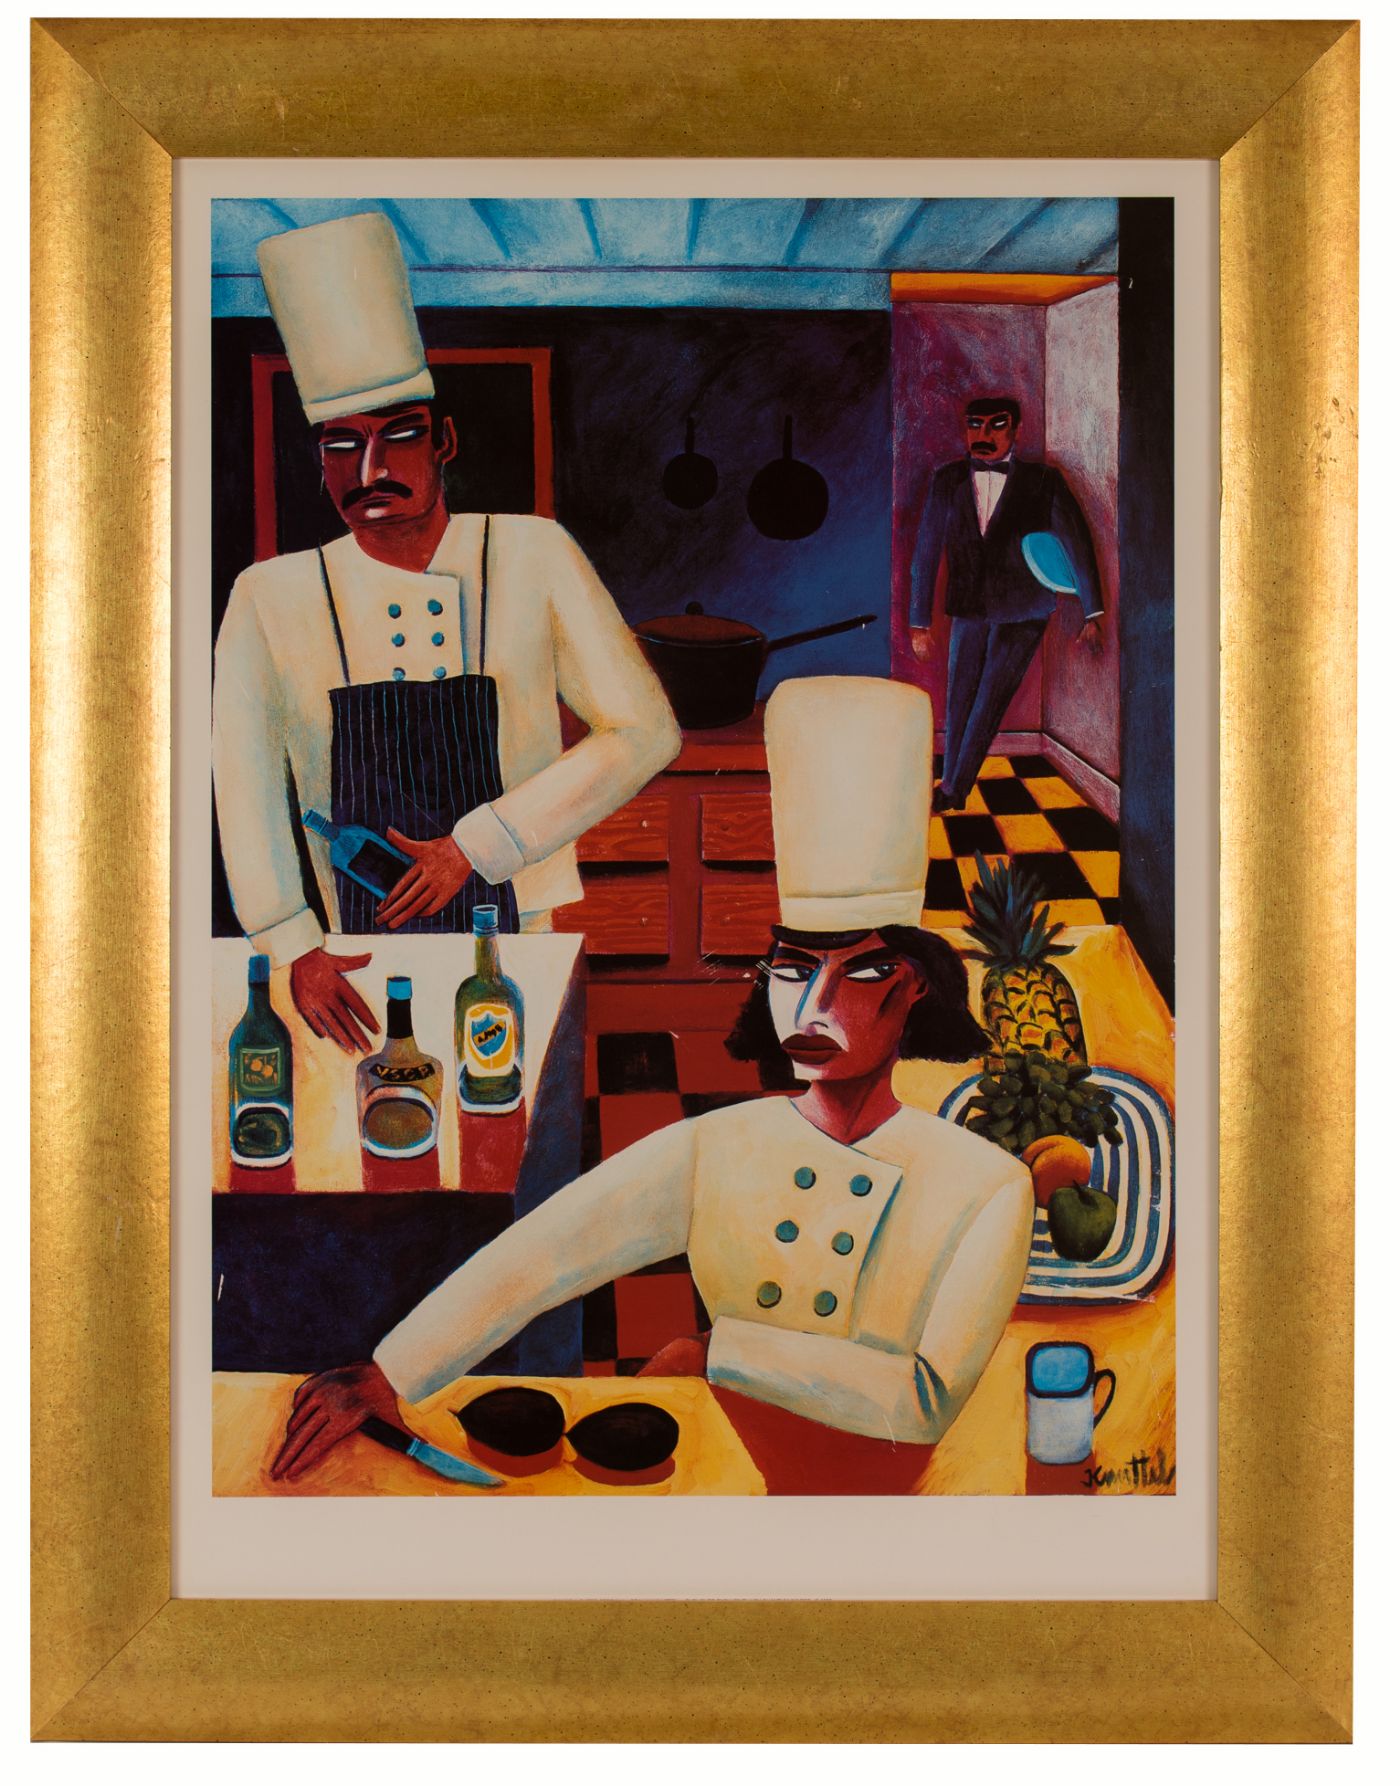 HOT CHEFS IN THE KITCHEN by Graham Knuttel  at Dolan's Art Auction House